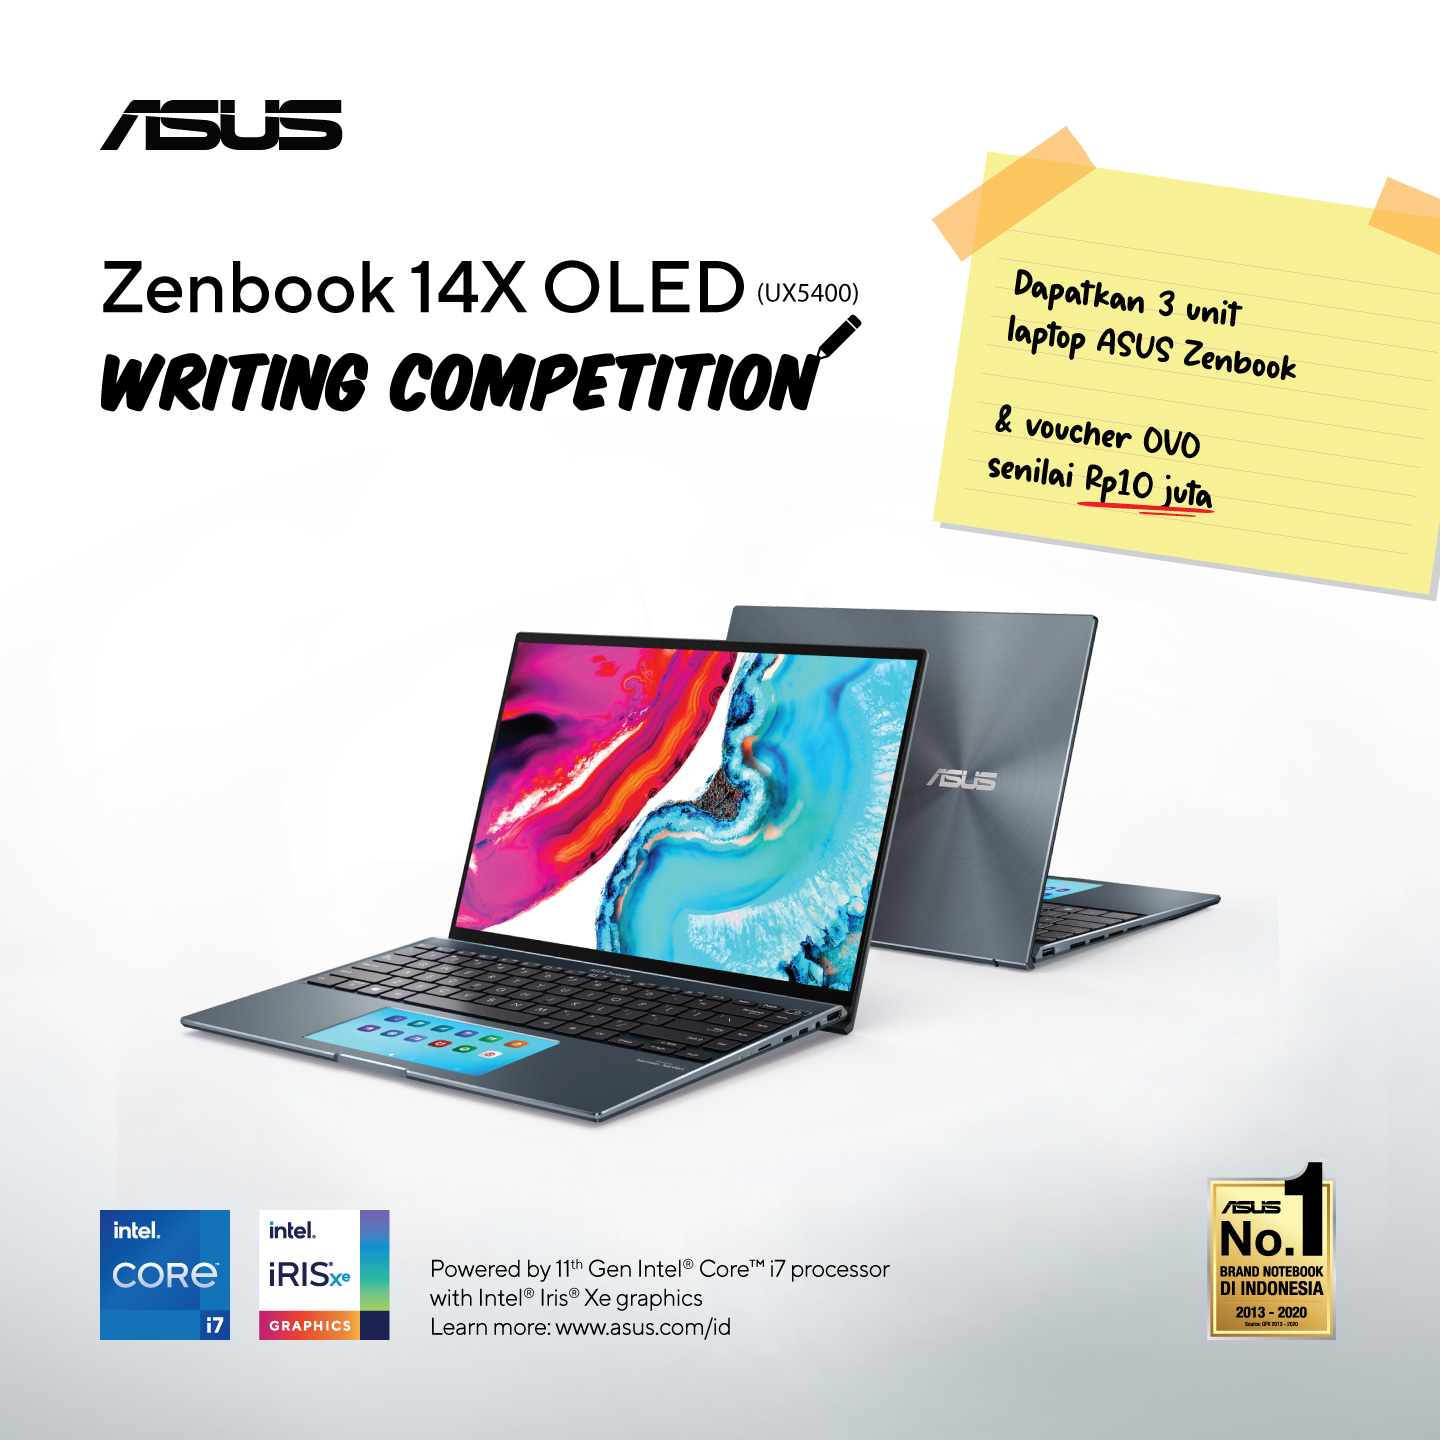 ASUS Zenbook 14X OLED (UX5400) Writing Competition